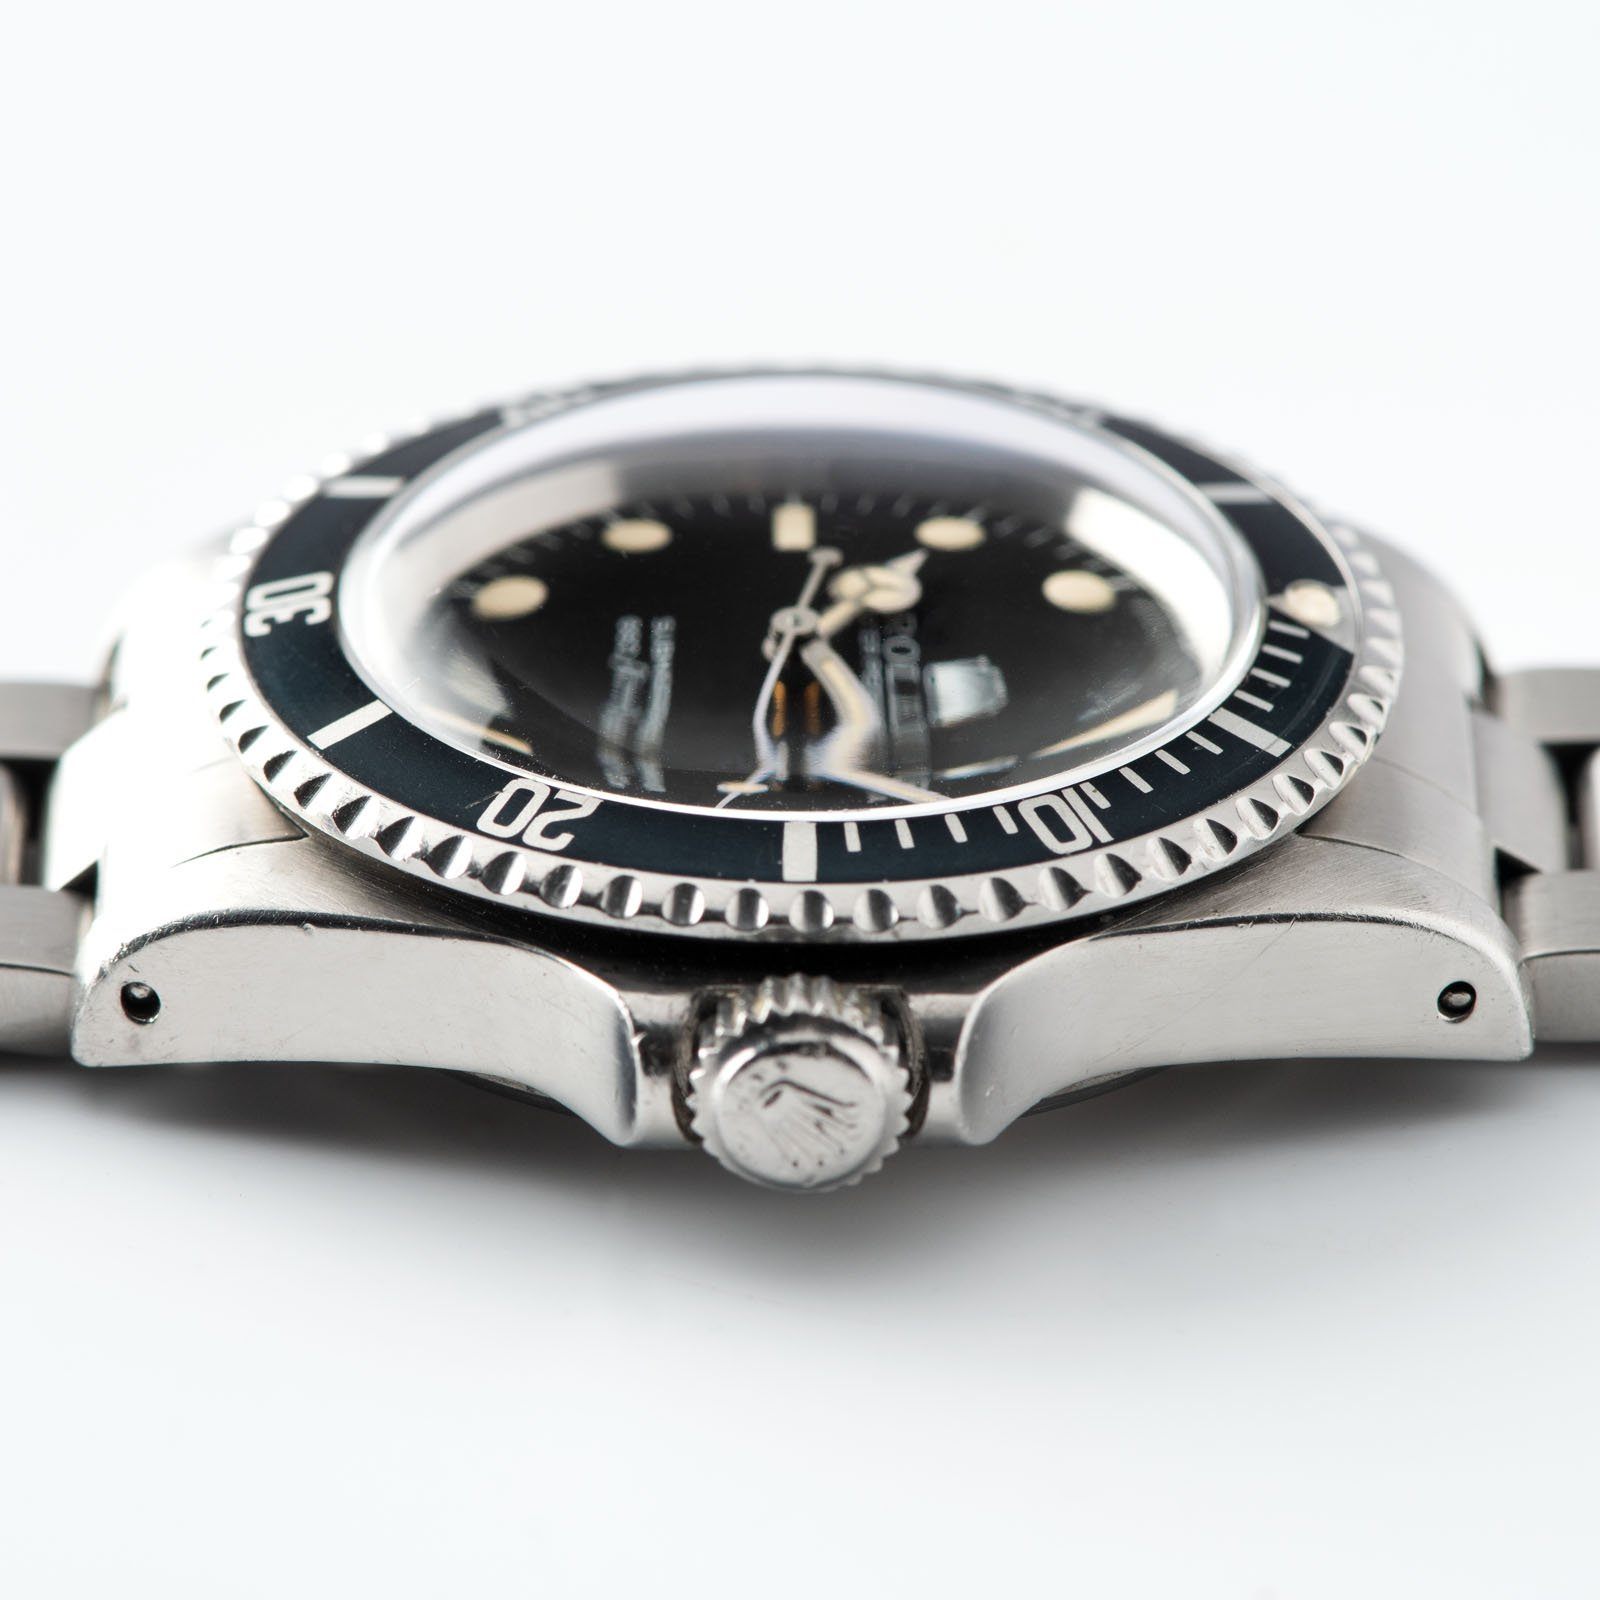 Rolex Submariner Mk3 Maxi Dial 5513 with a 40mm steel case